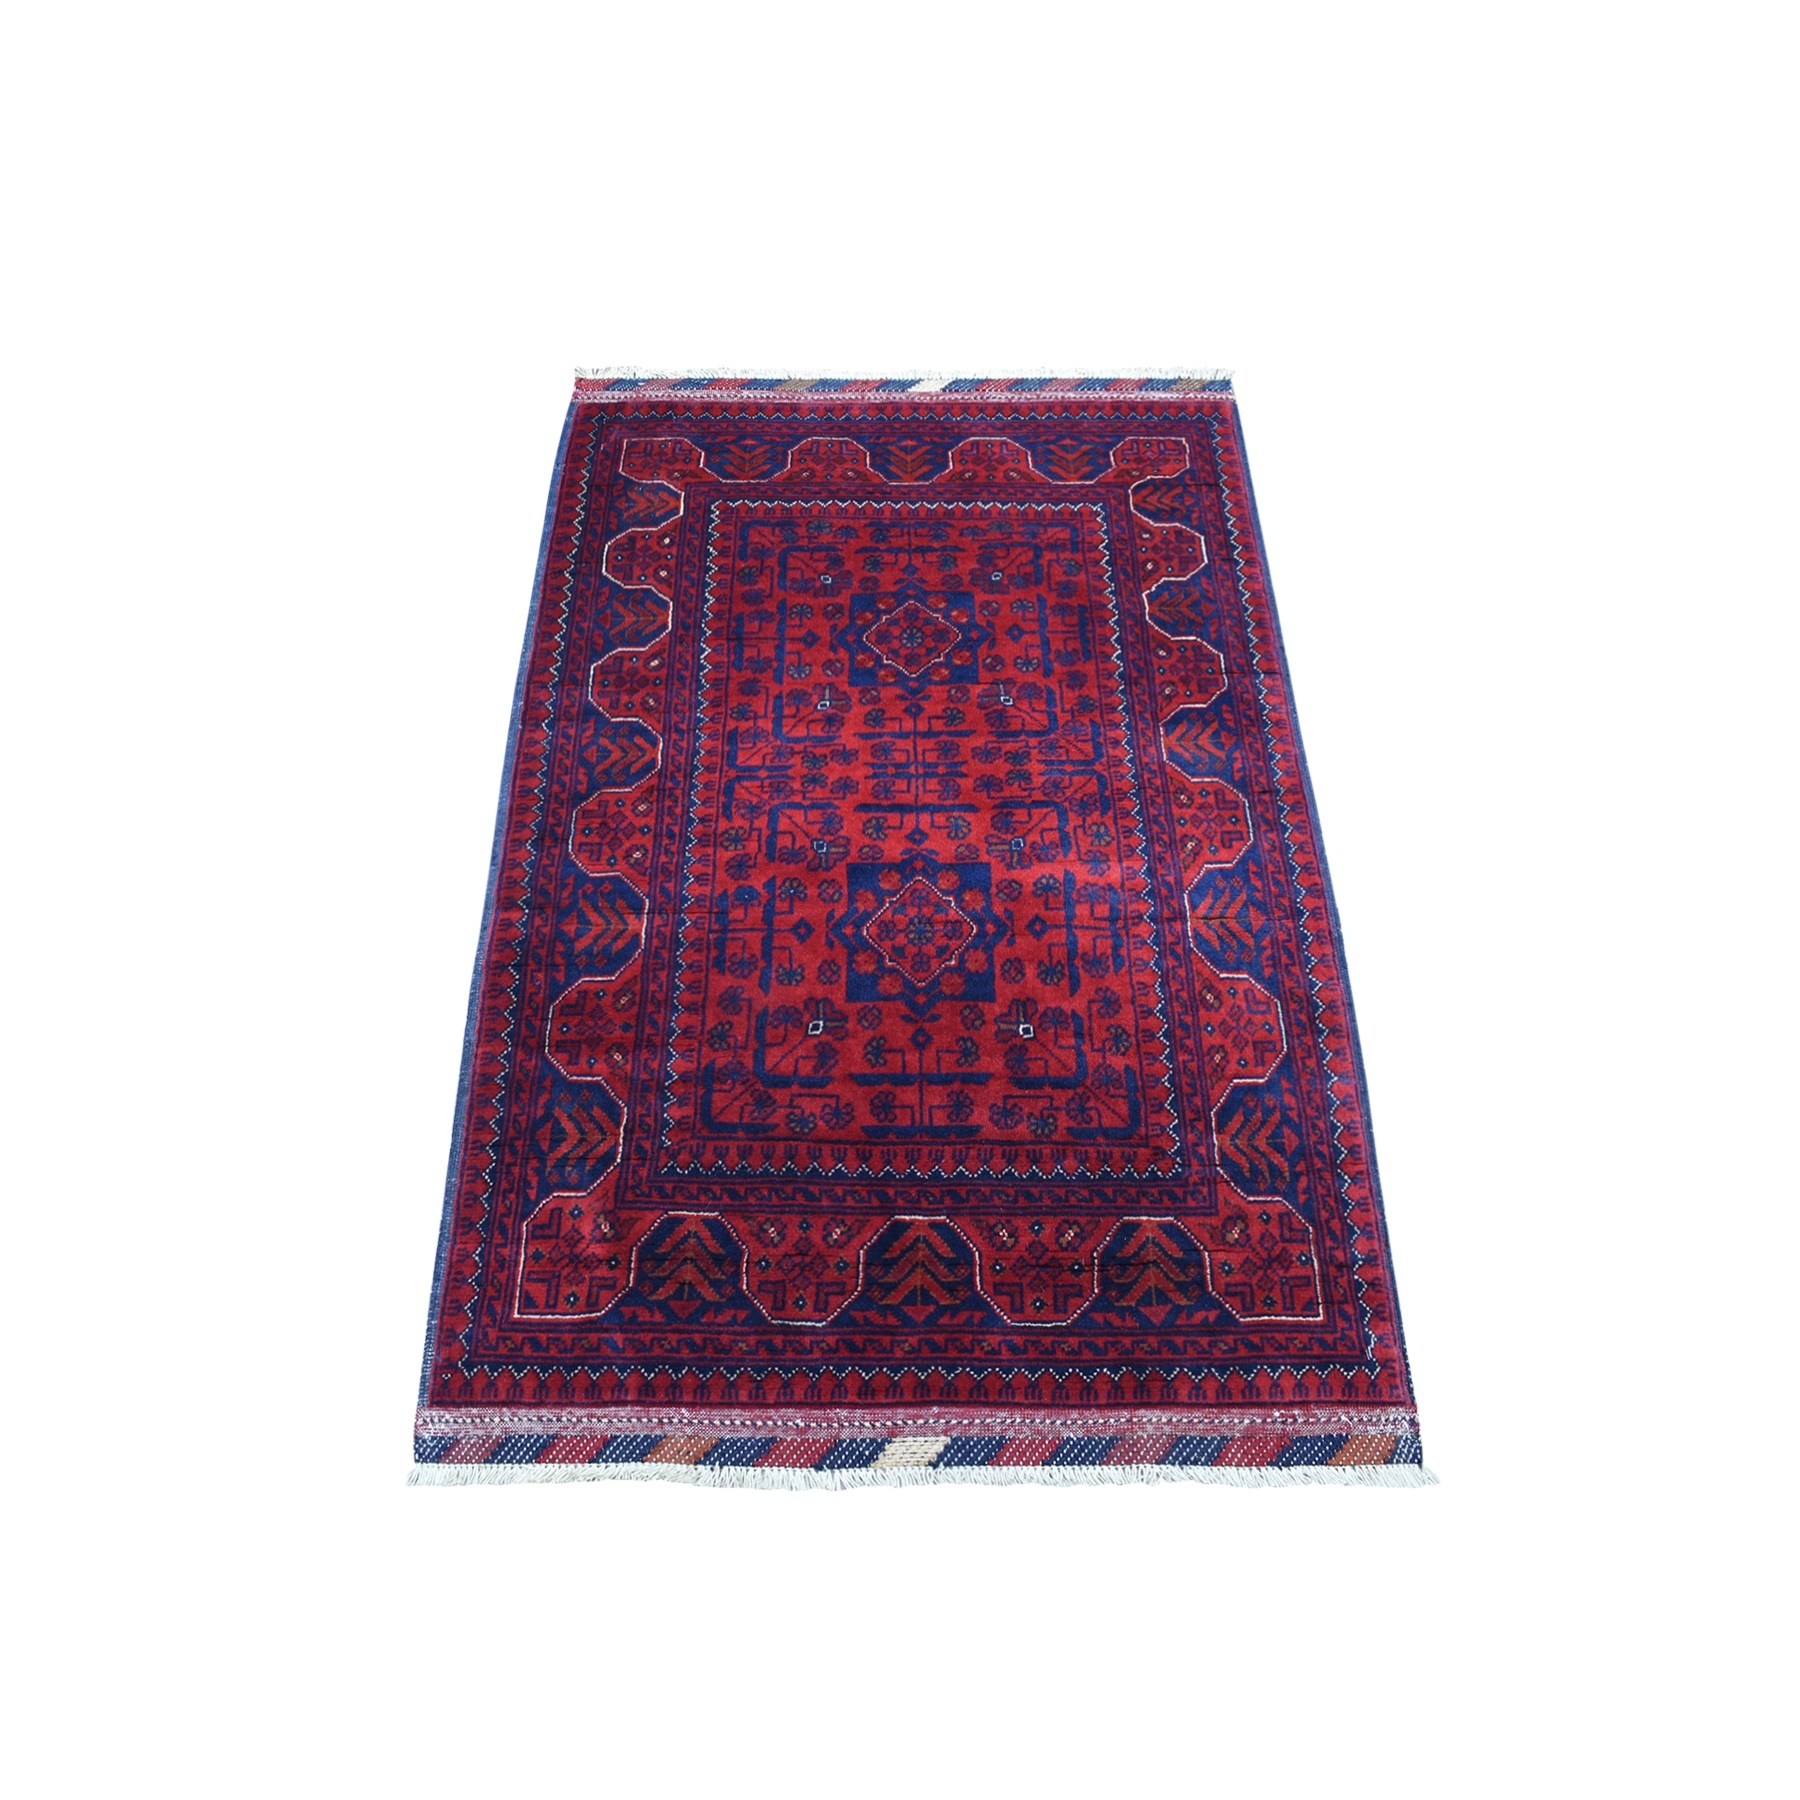 2'9"x4'2" Deep and Saturated Red Geometric Design Afghan Khamyab Shiny Wool Hand Woven Oriental Rug 